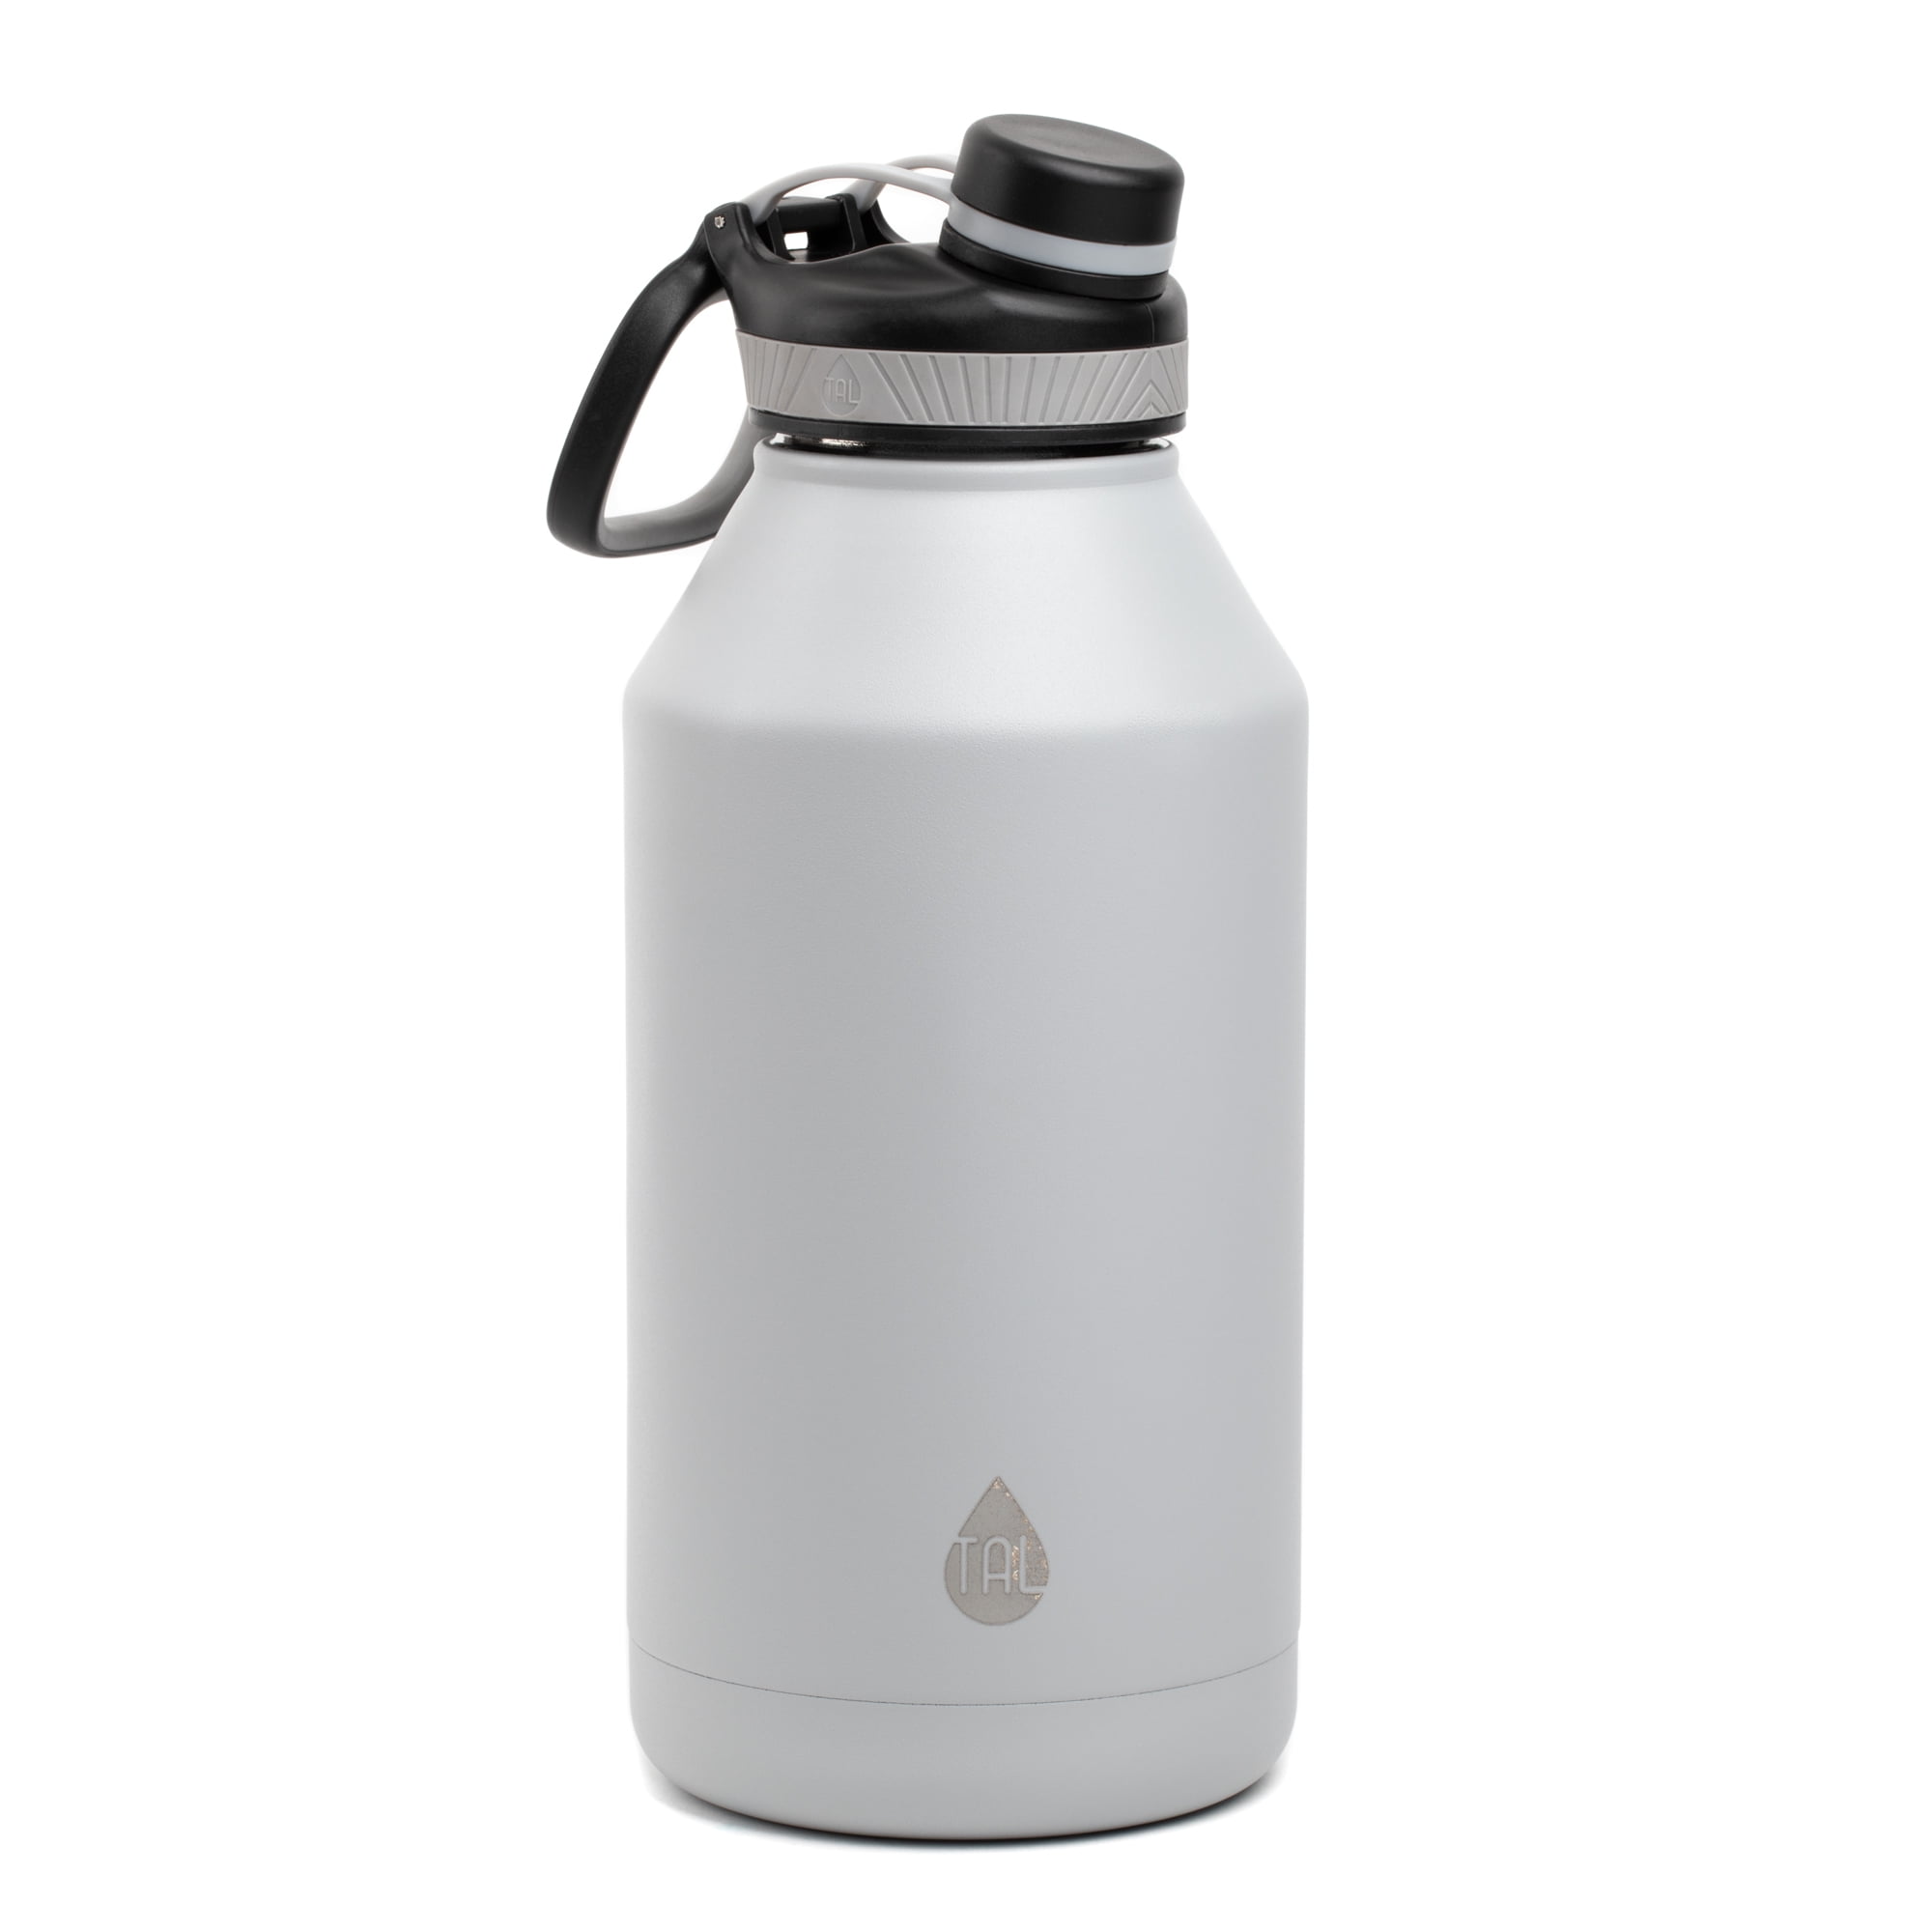  TAL Ranger 64 oz Black Solid Print Stainless Steel Water Bottle  with Wide Mouth Lid (Black) : Sports & Outdoors